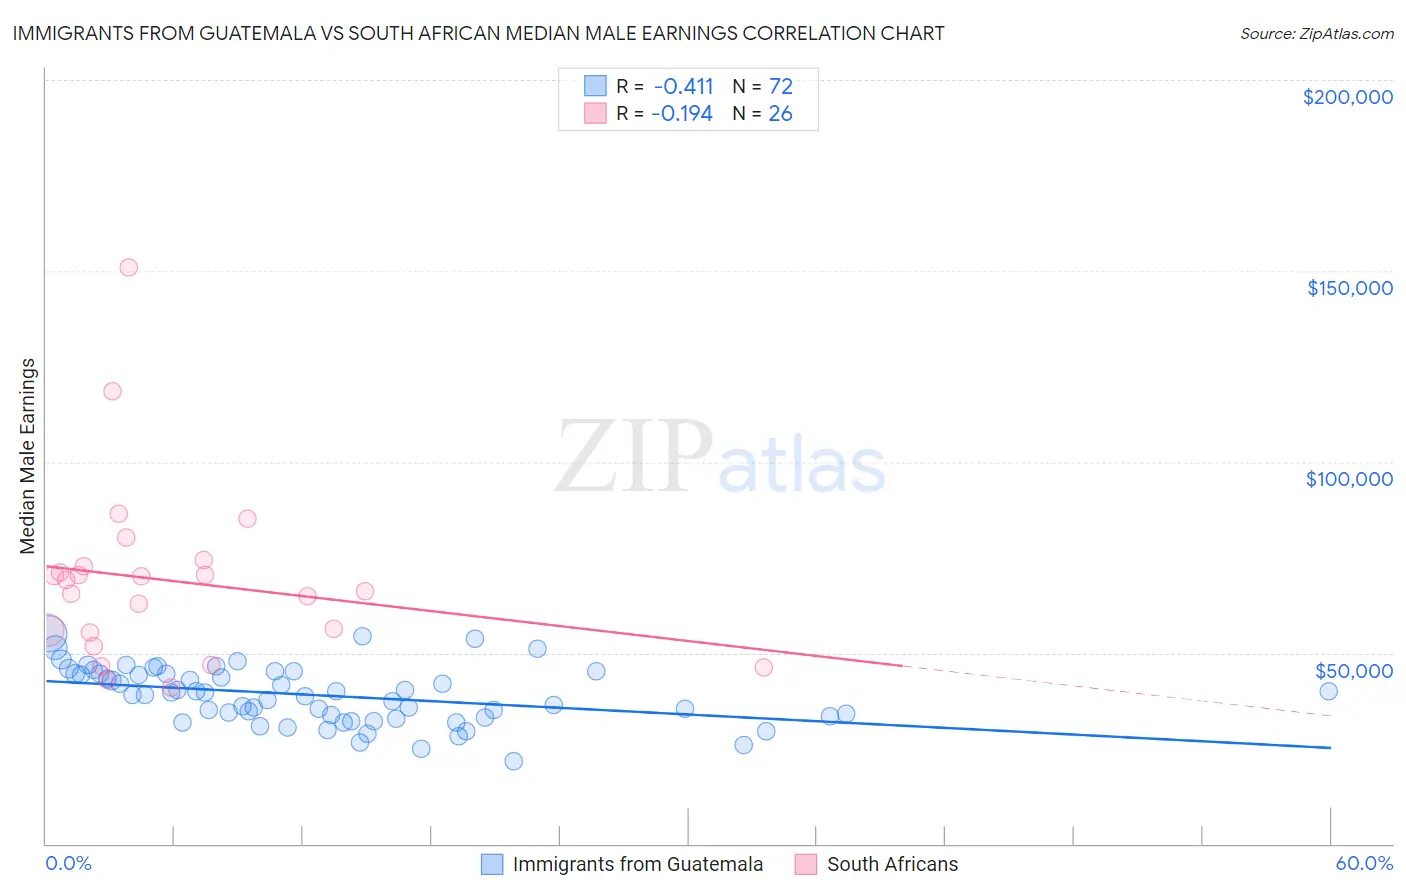 Immigrants from Guatemala vs South African Median Male Earnings